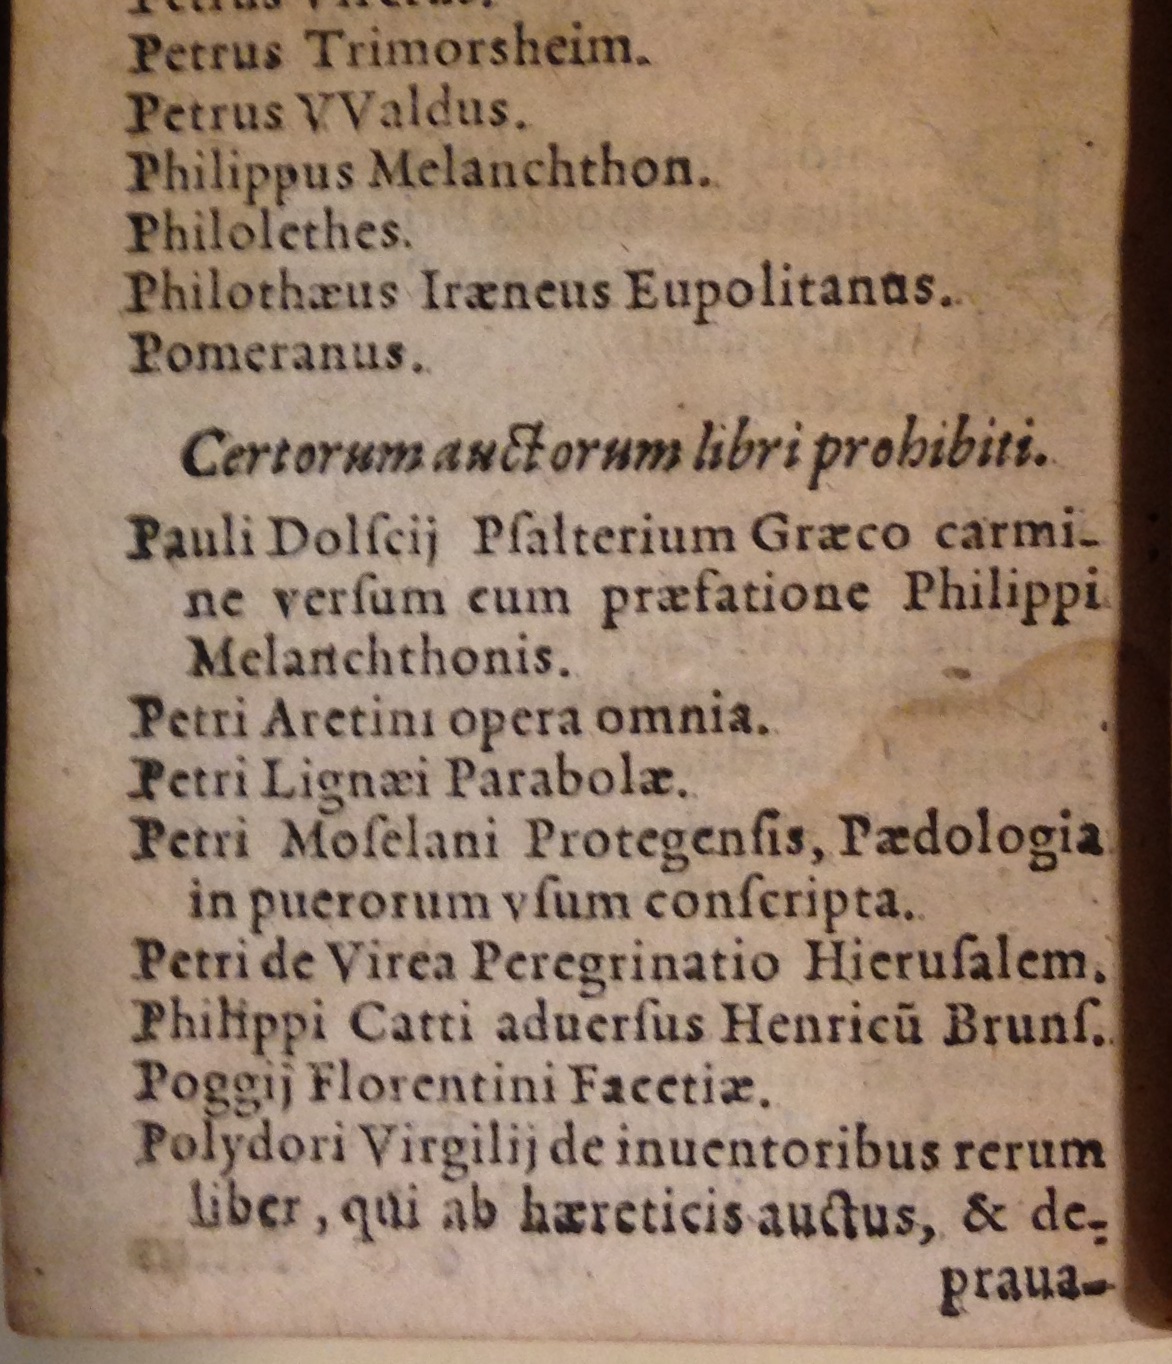 In bad company: Pietro Aretino joins Philipp Melanchthon, Poggio Bracciolini, and Polydore Vergil on the Roman Catholic Church's Index of prohibited books. This 1569 pocket edition of the Index Librorum Prohibitorum was issued in Cologne.     (BX830 1545 .A2 1569)